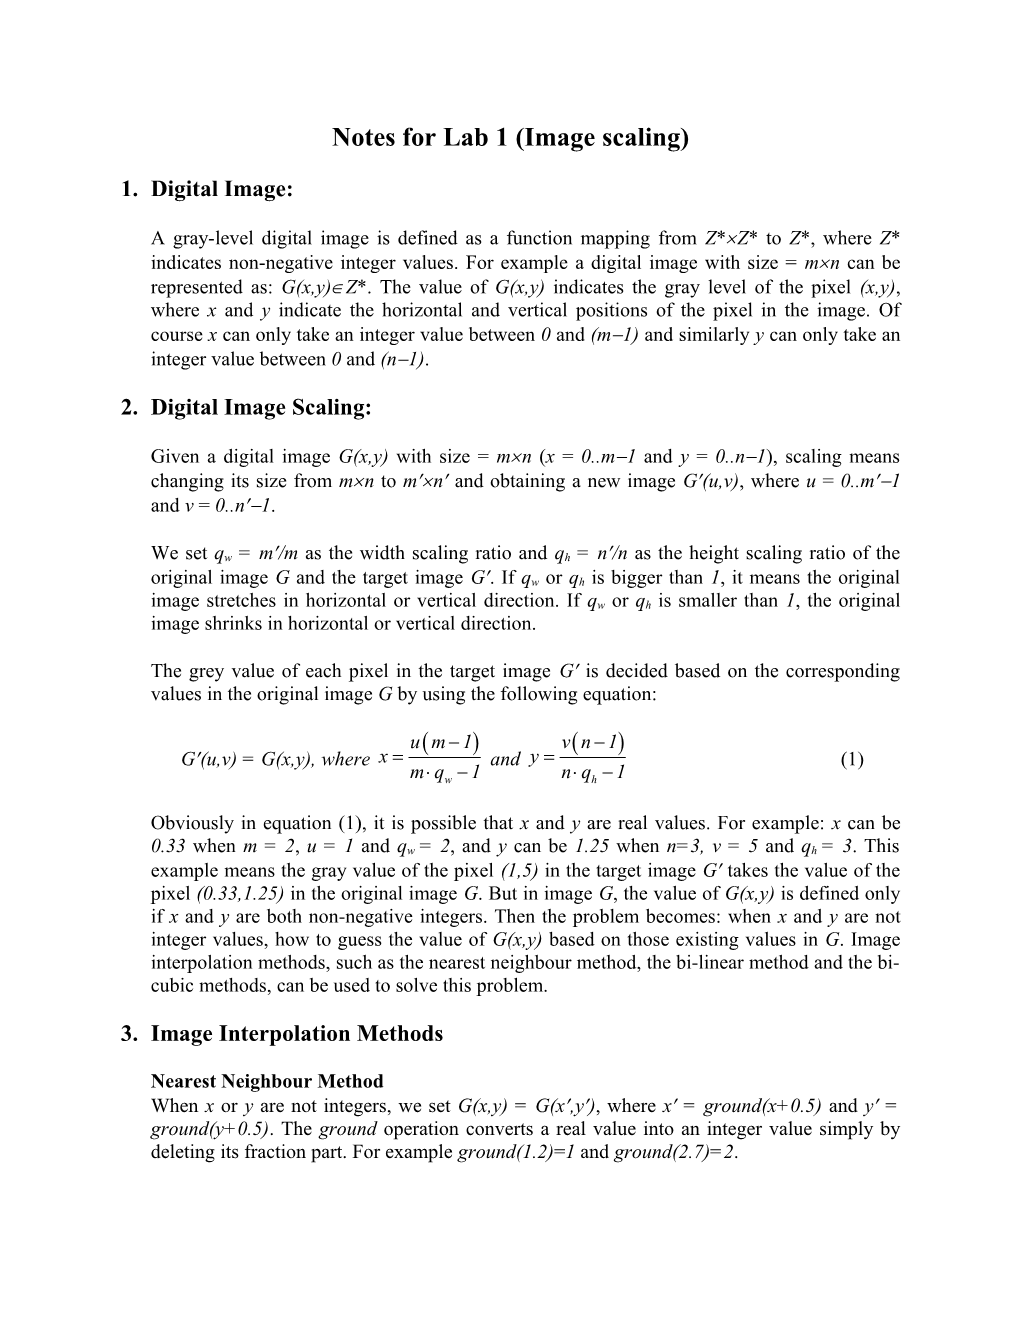 Notes for Assignment 1 (Image Scaling)